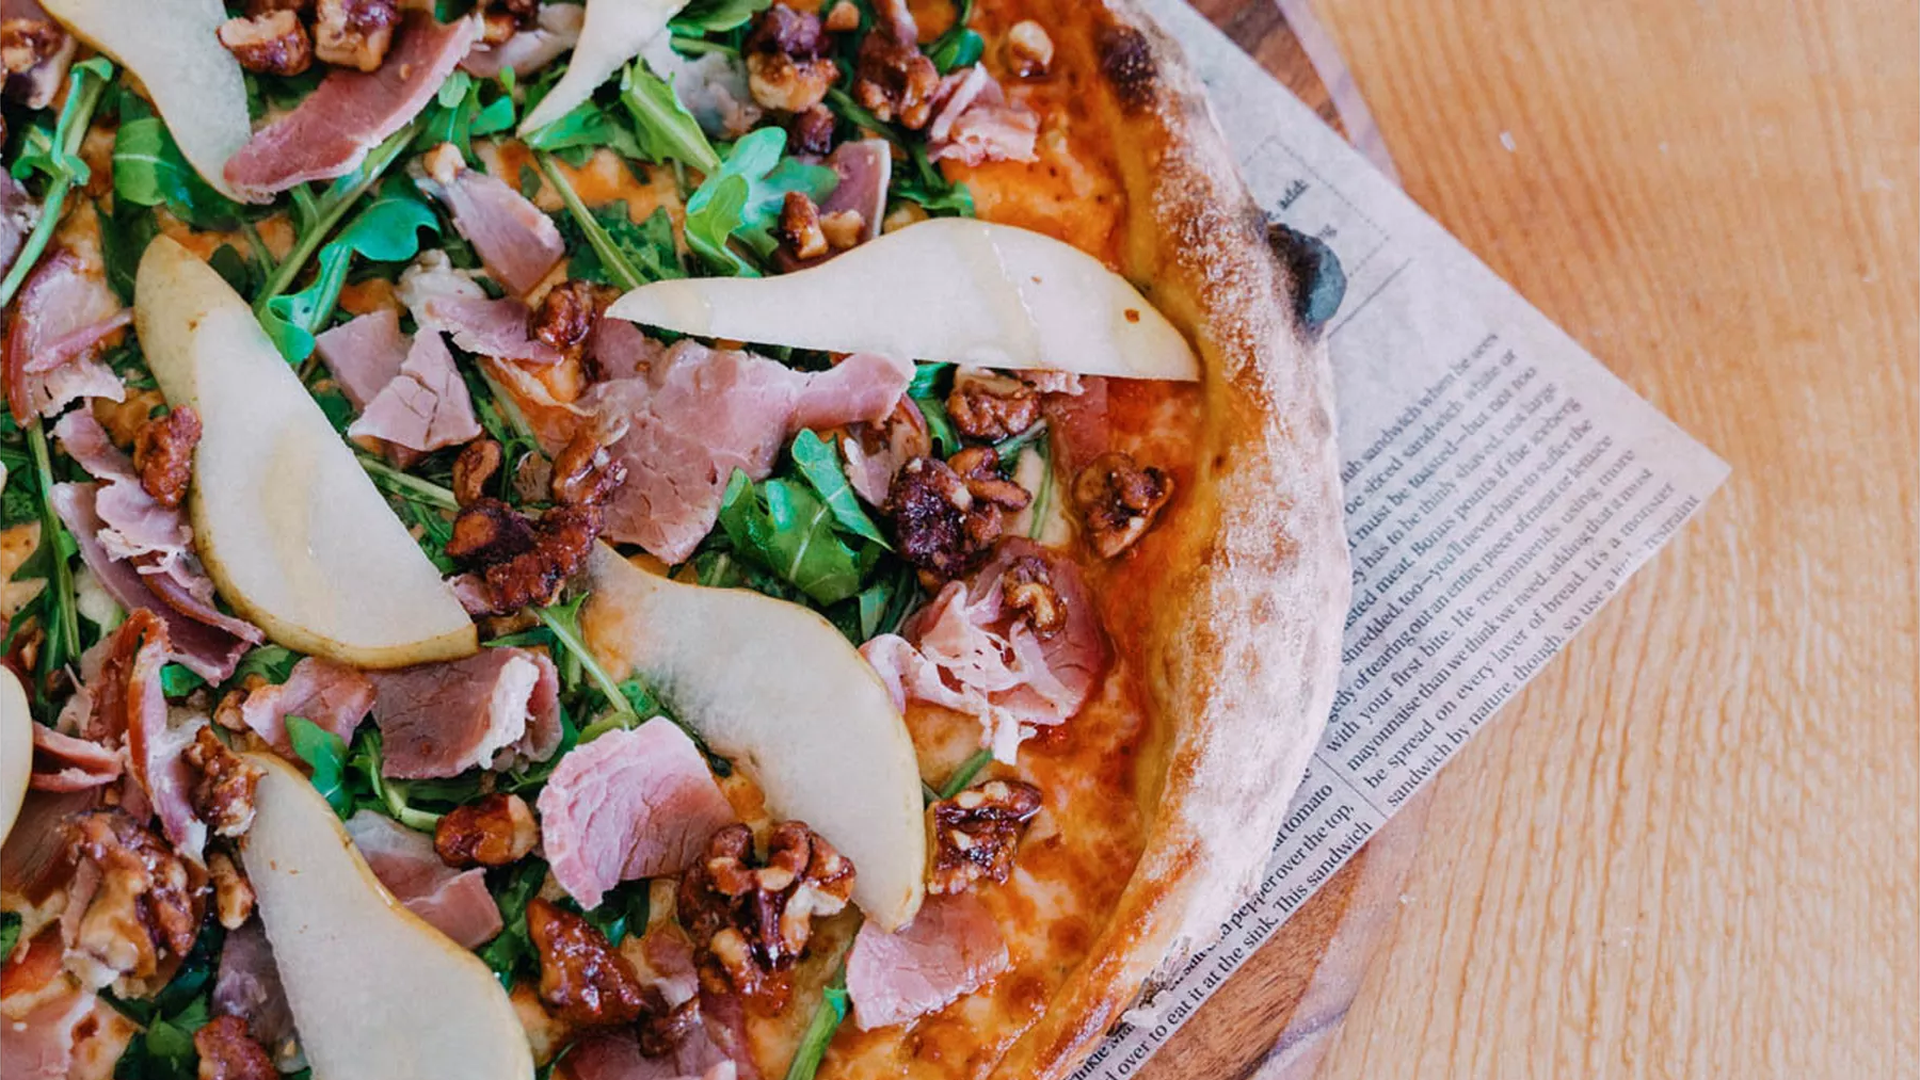 A large pizza with meat, greens and pears on top.